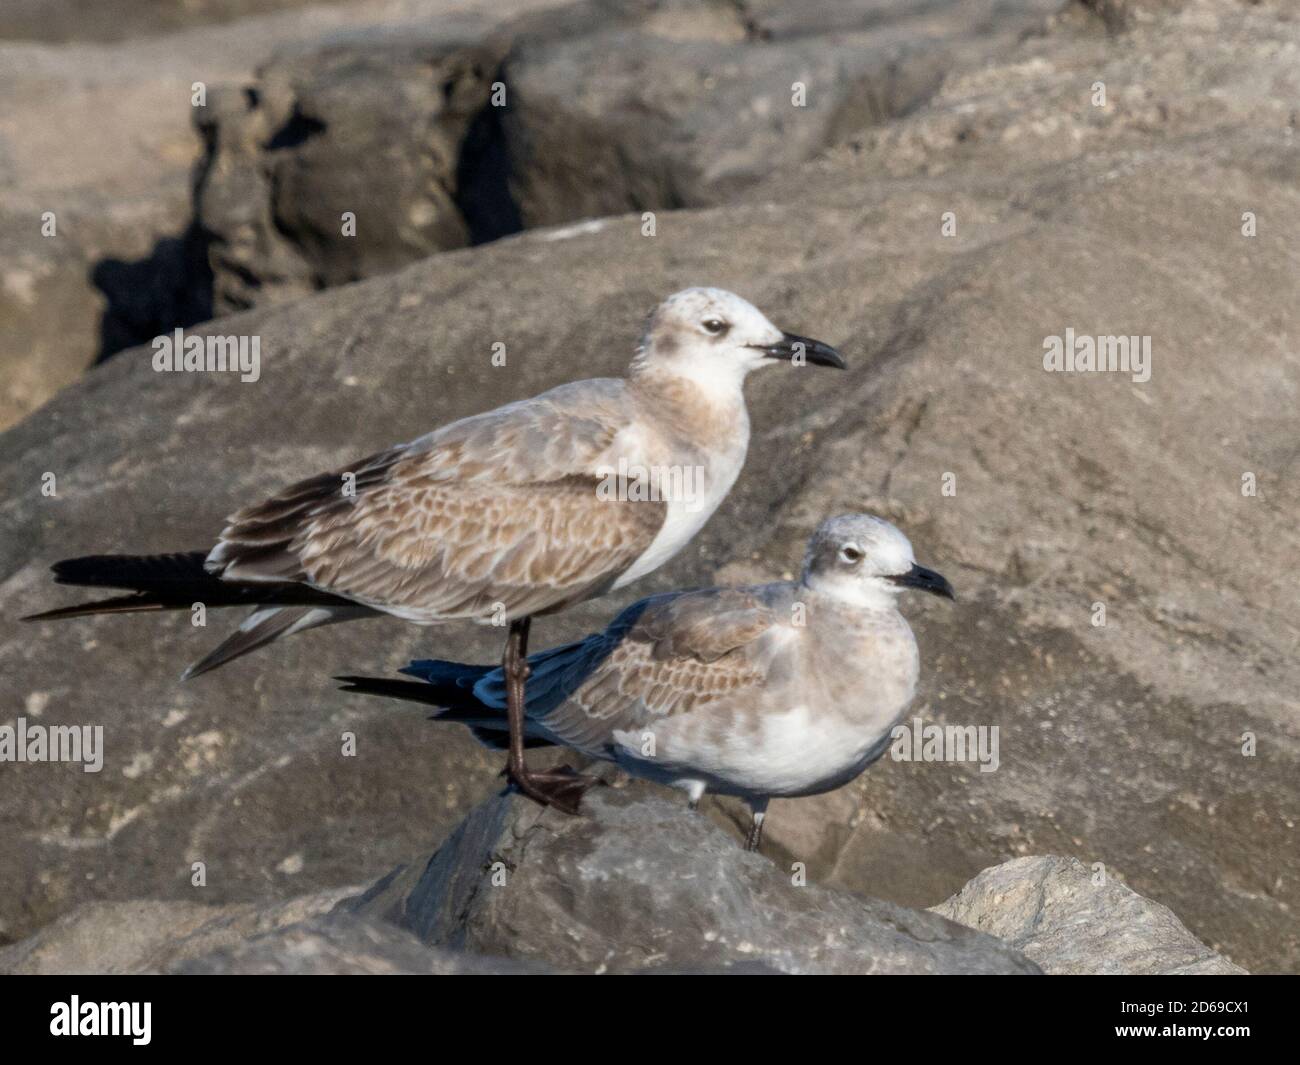 Two birds sitting together on a rock Stock Photo